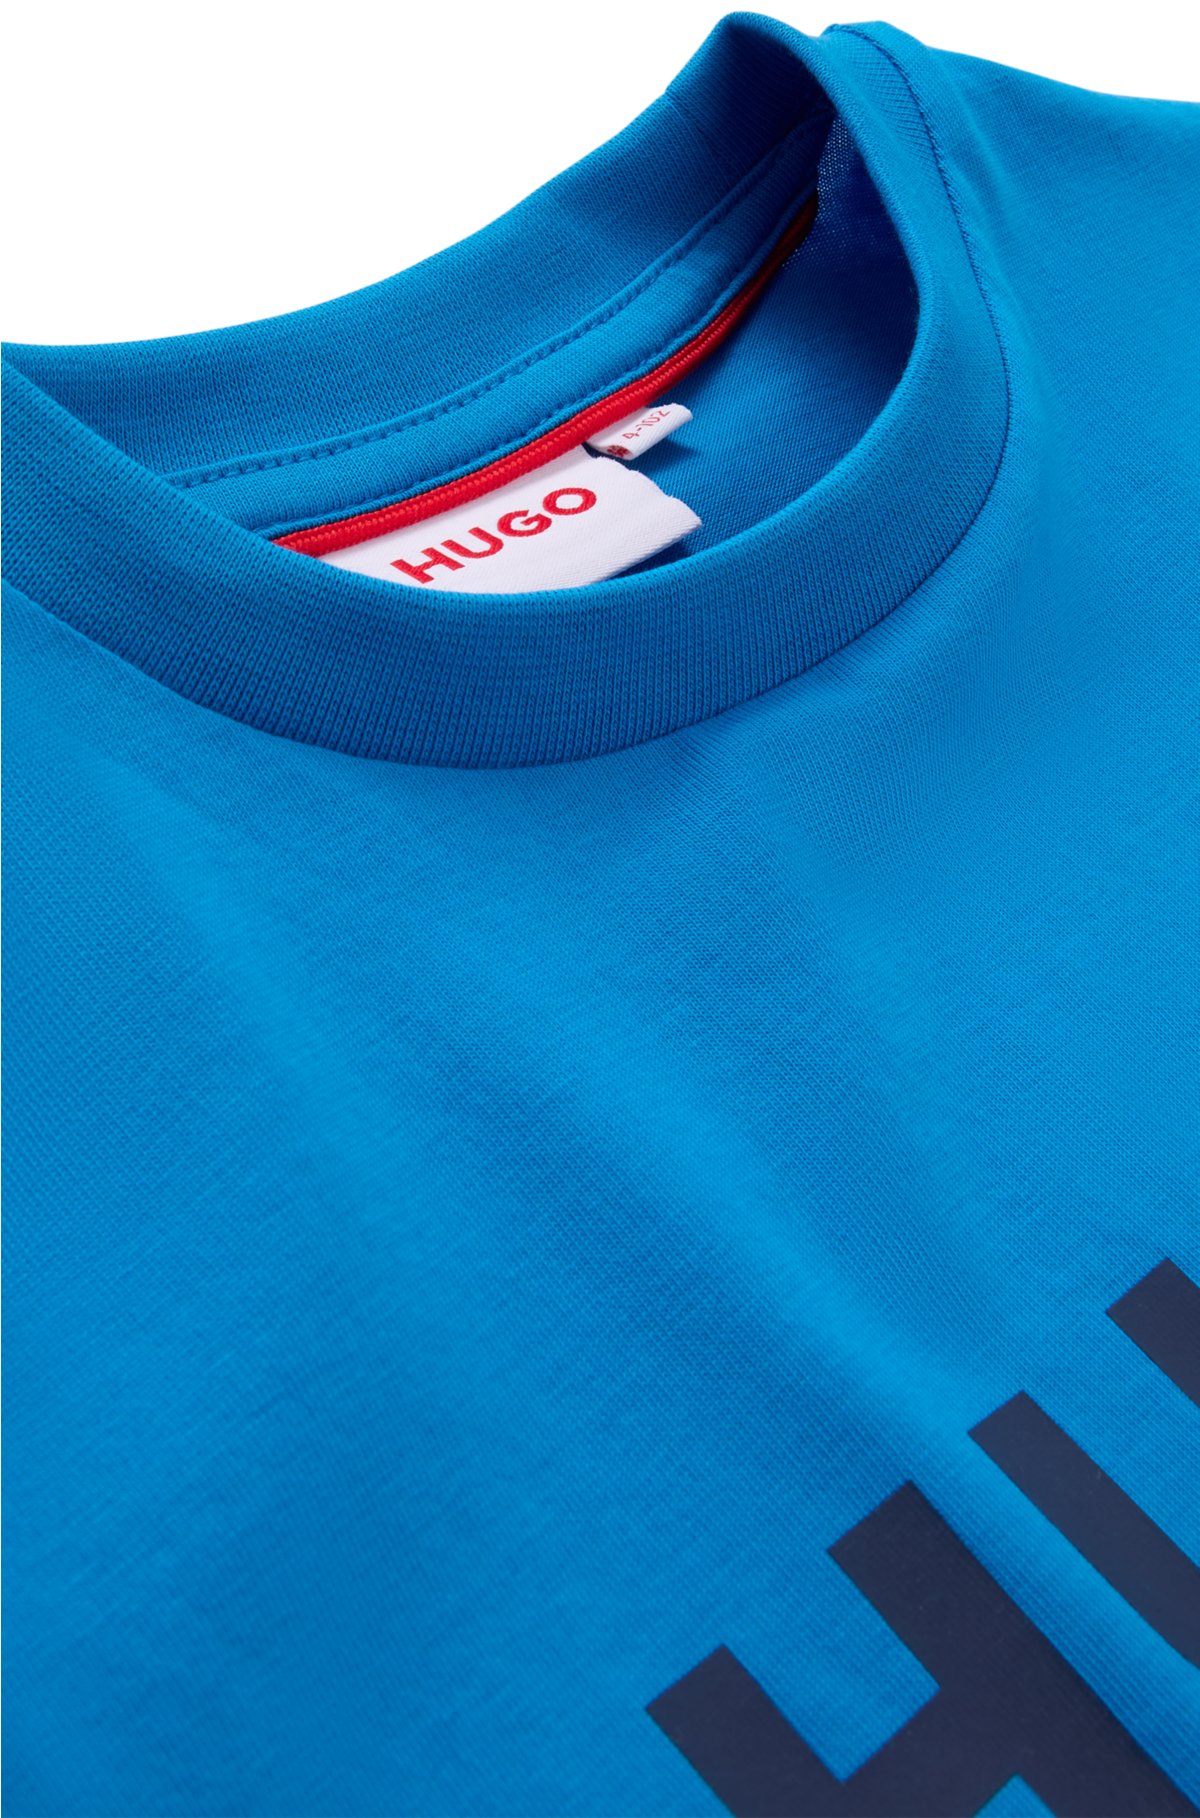 Kids' T-shirt in cotton jersey with logo print, Blue